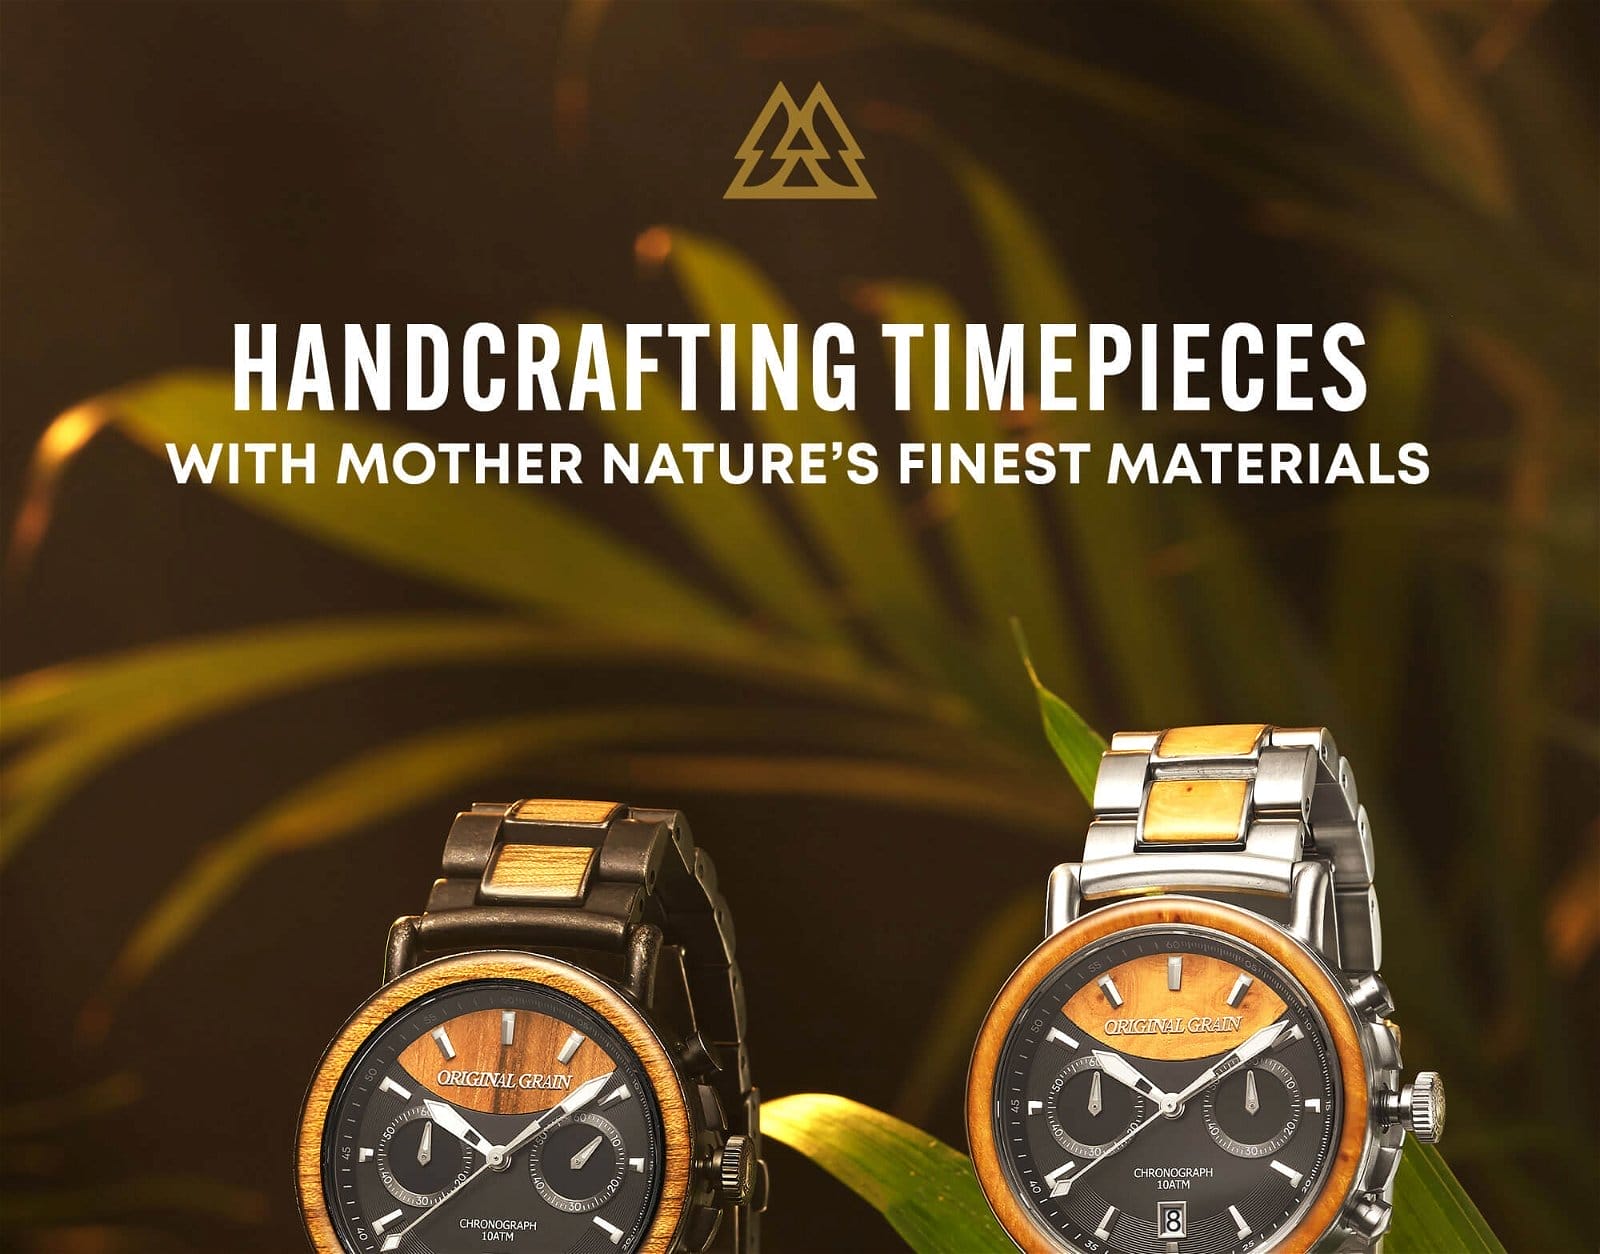 Original Grain HANDCRAFTS WATCHES WITH MOTHER NATURE'S FINEST MATERIALS